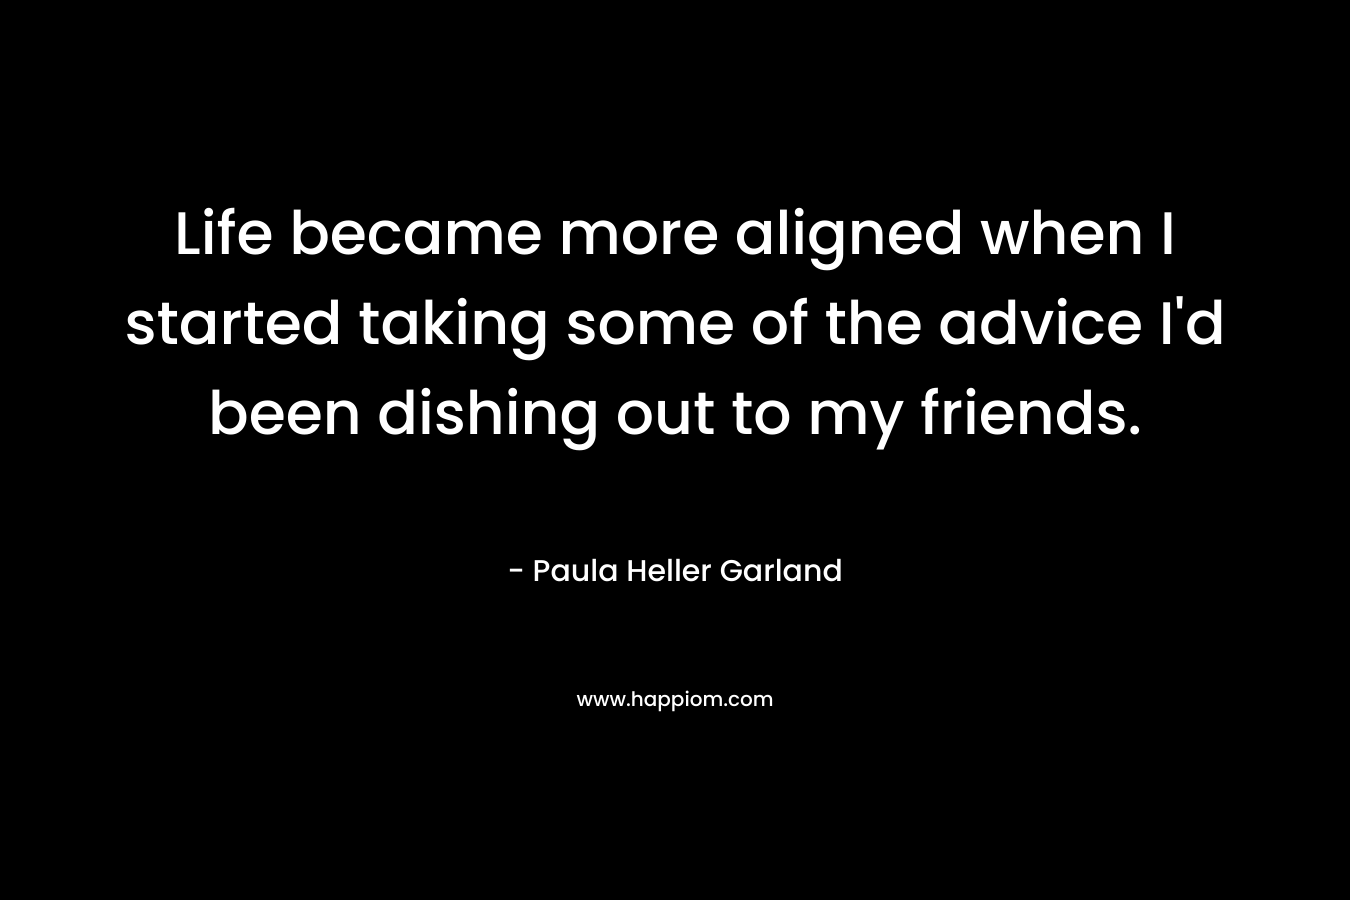 Life became more aligned when I started taking some of the advice I'd been dishing out to my friends.